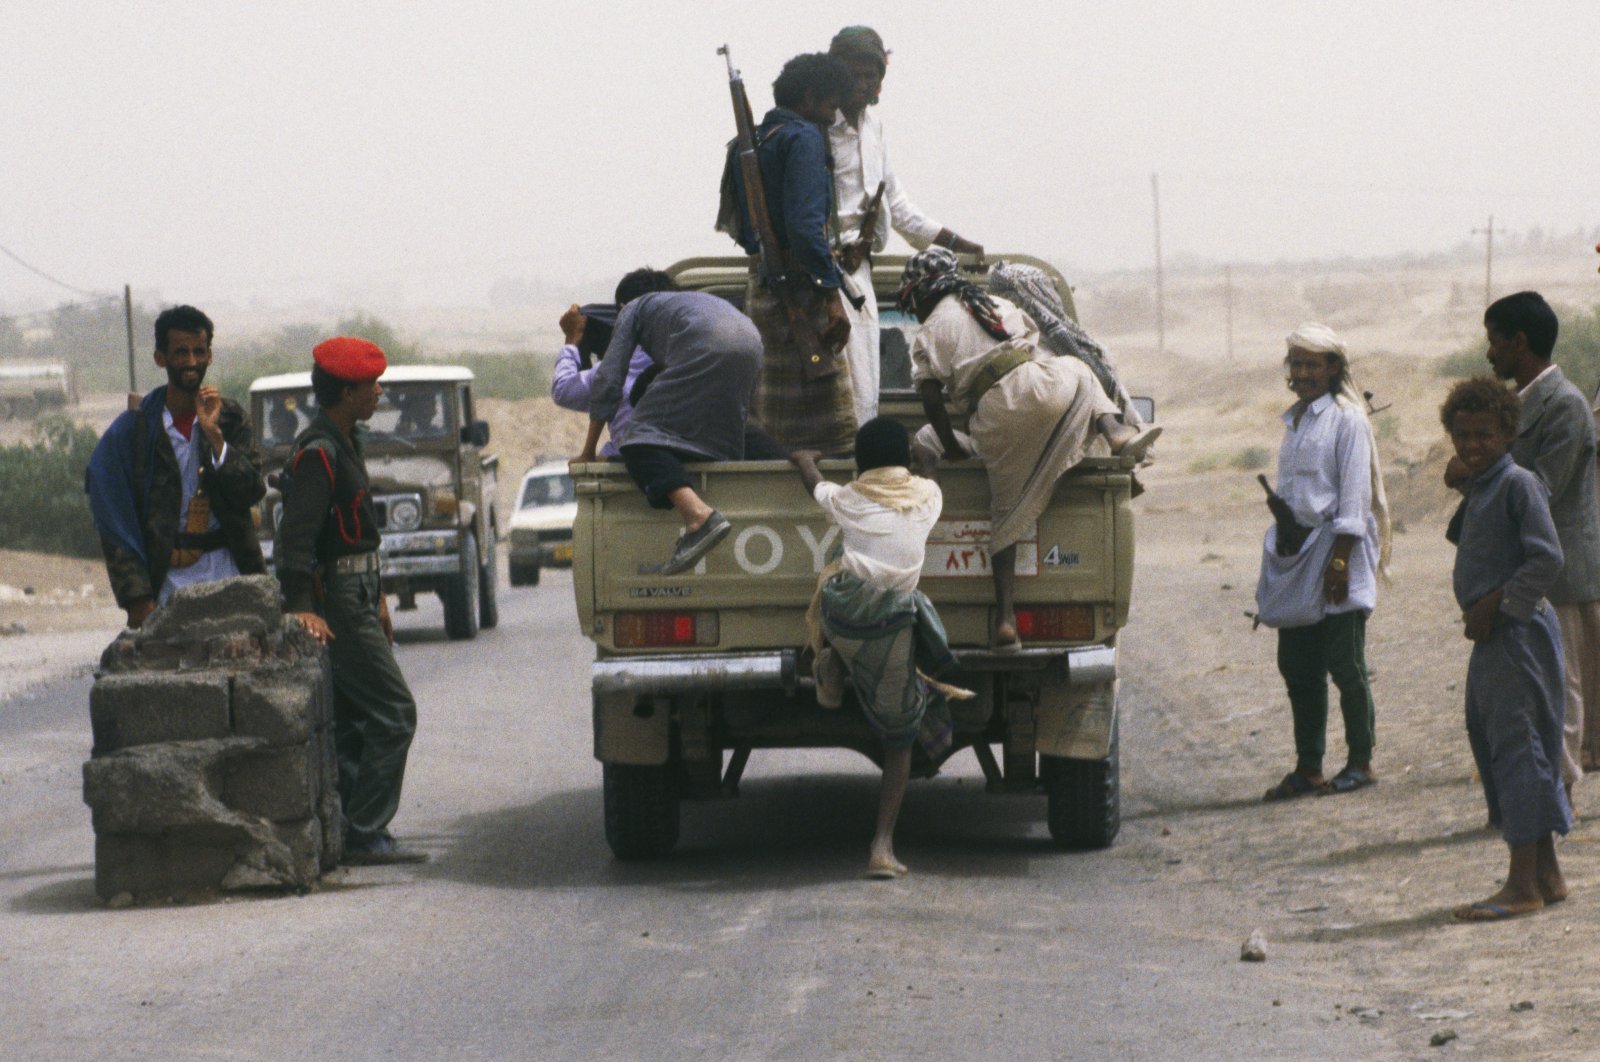 Soldiers guard the main road through Marib as locals hop on and off trucks passing through town, Marib, Yemen, April 1995. (Getty Images)